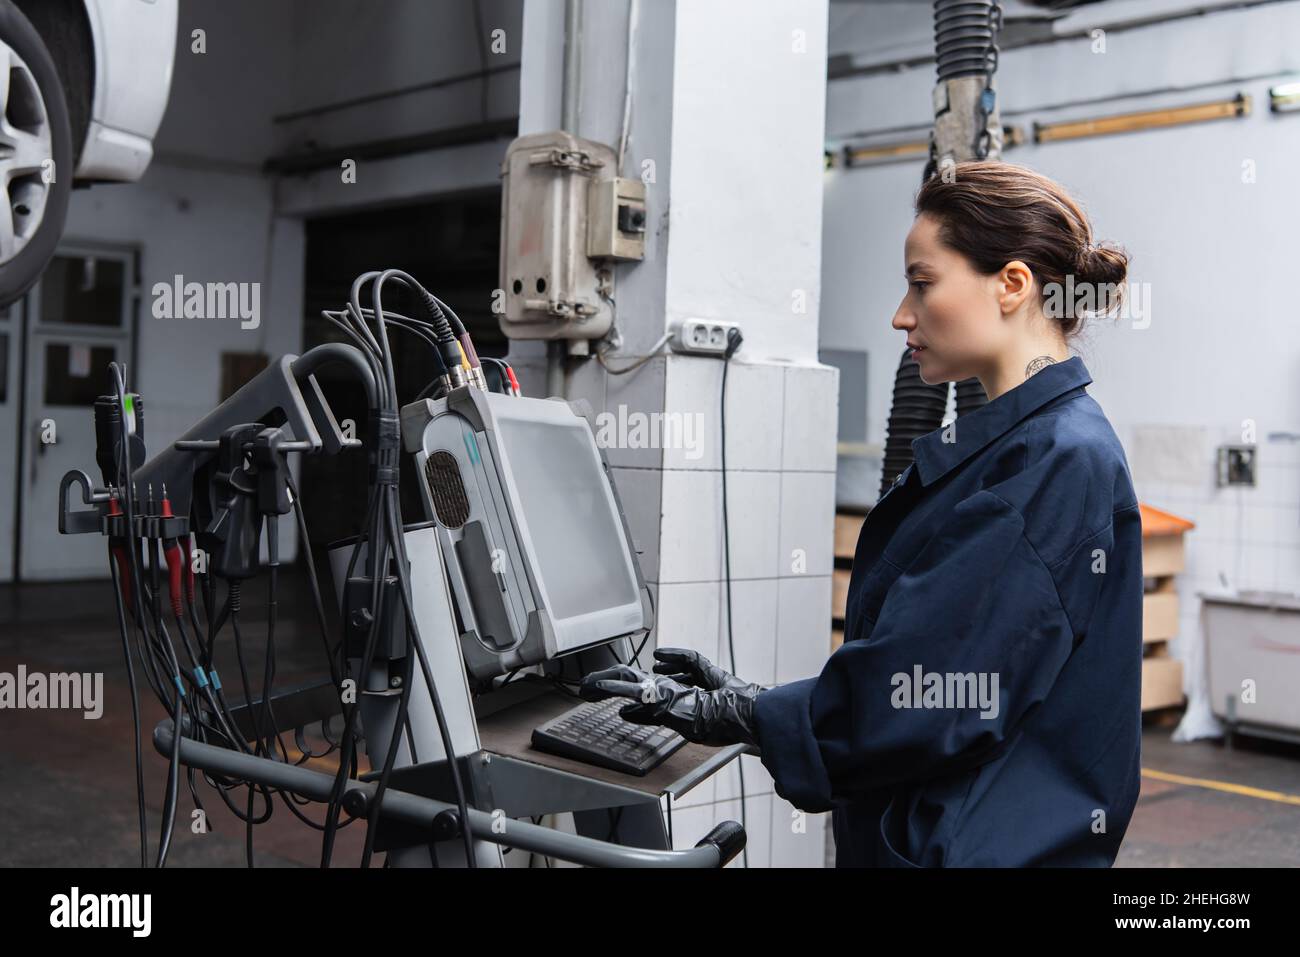 Side view of forewoman using computer near blurred car in garage Stock Photo